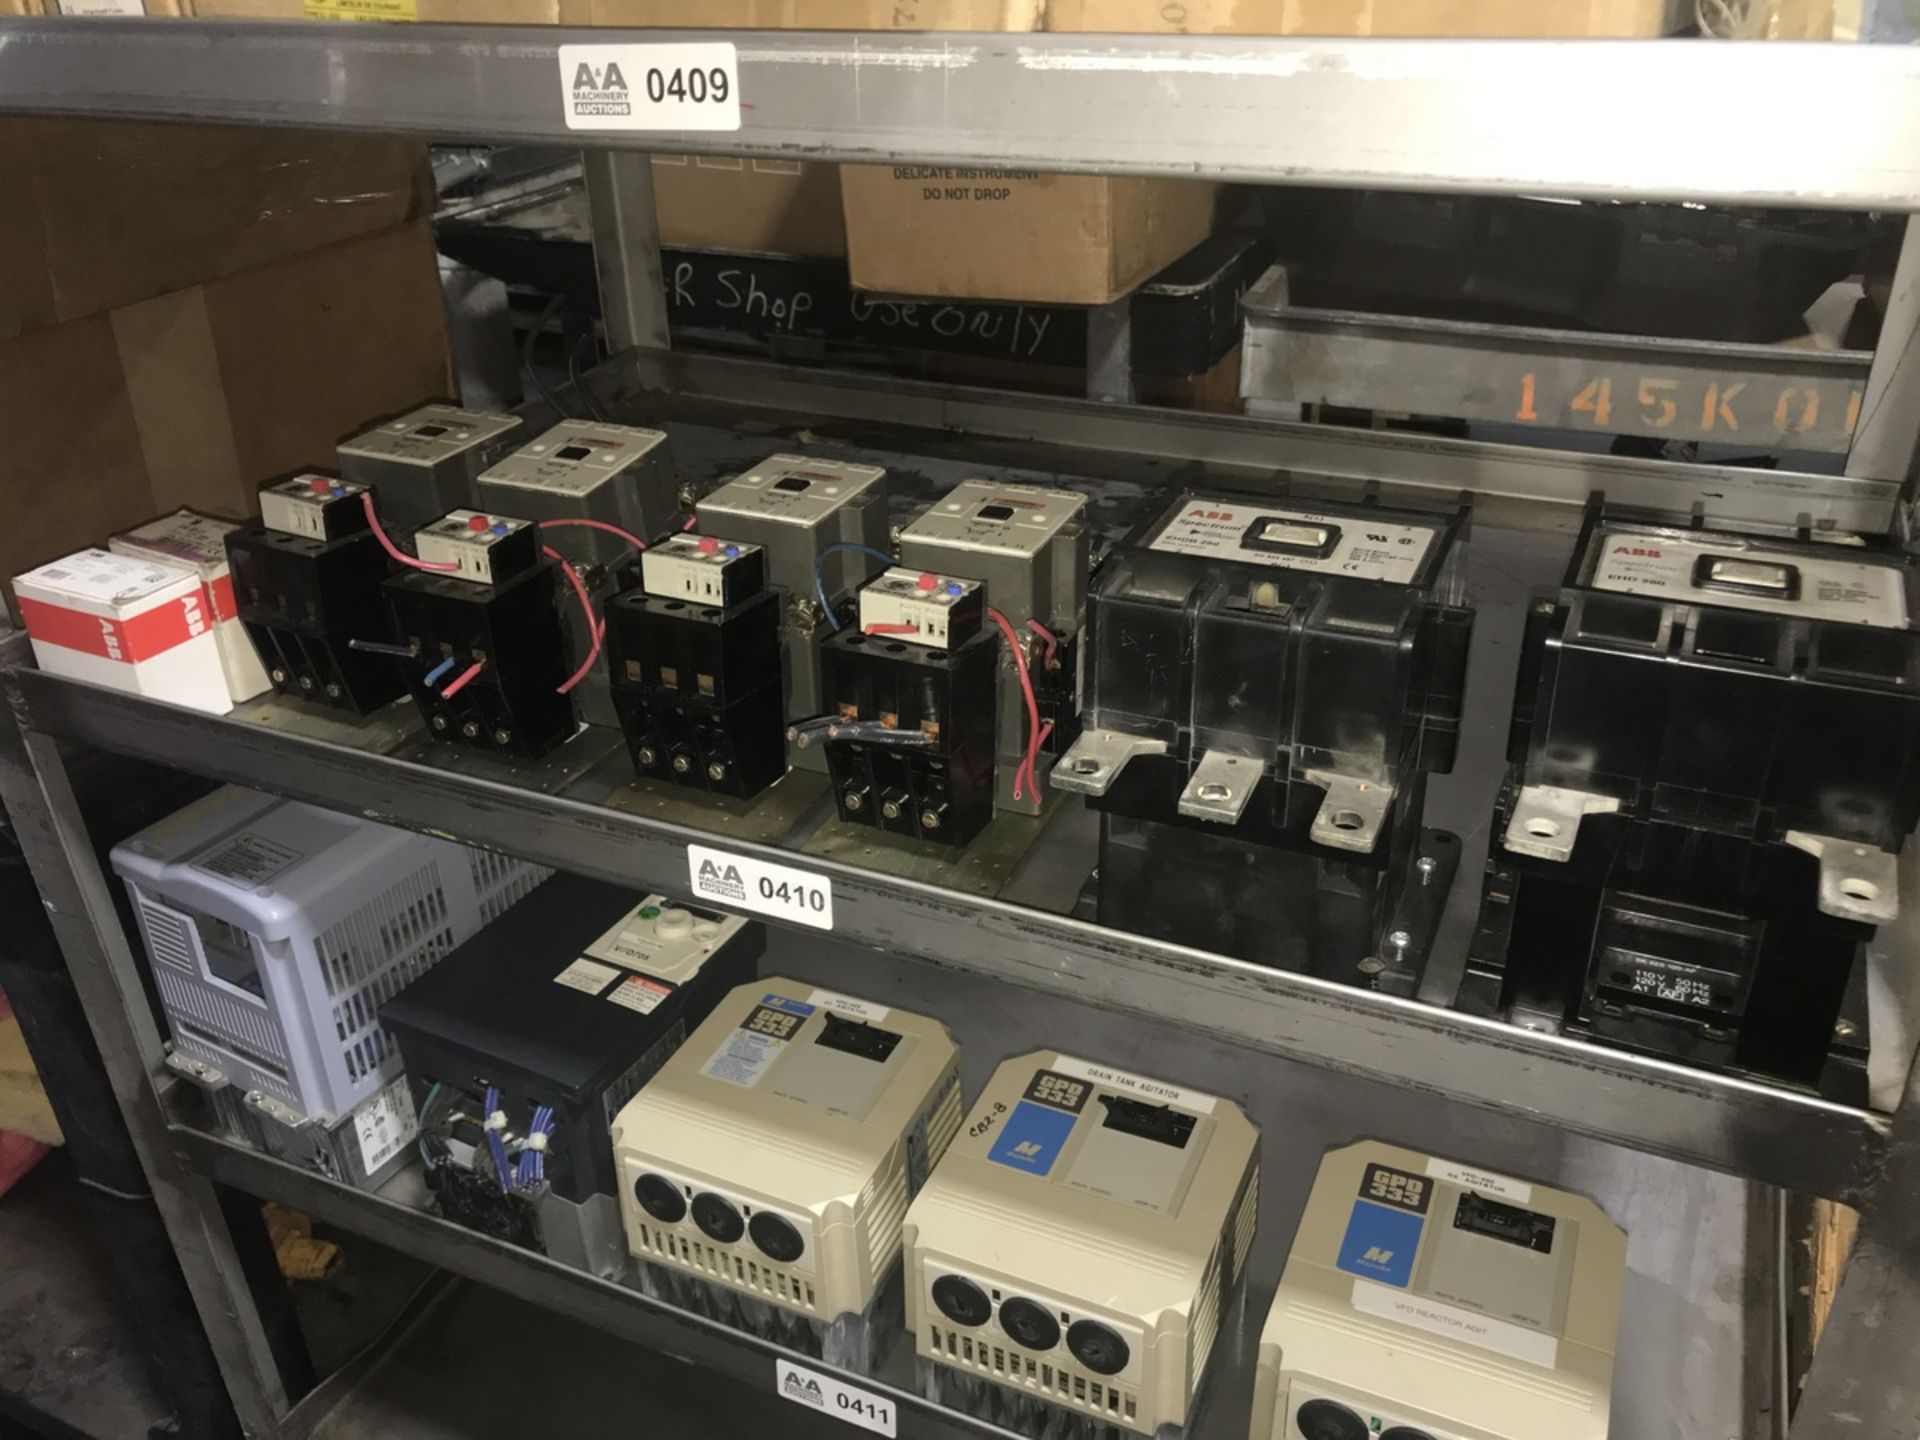 Contents of Shelf including Drives and Circuit Breakers